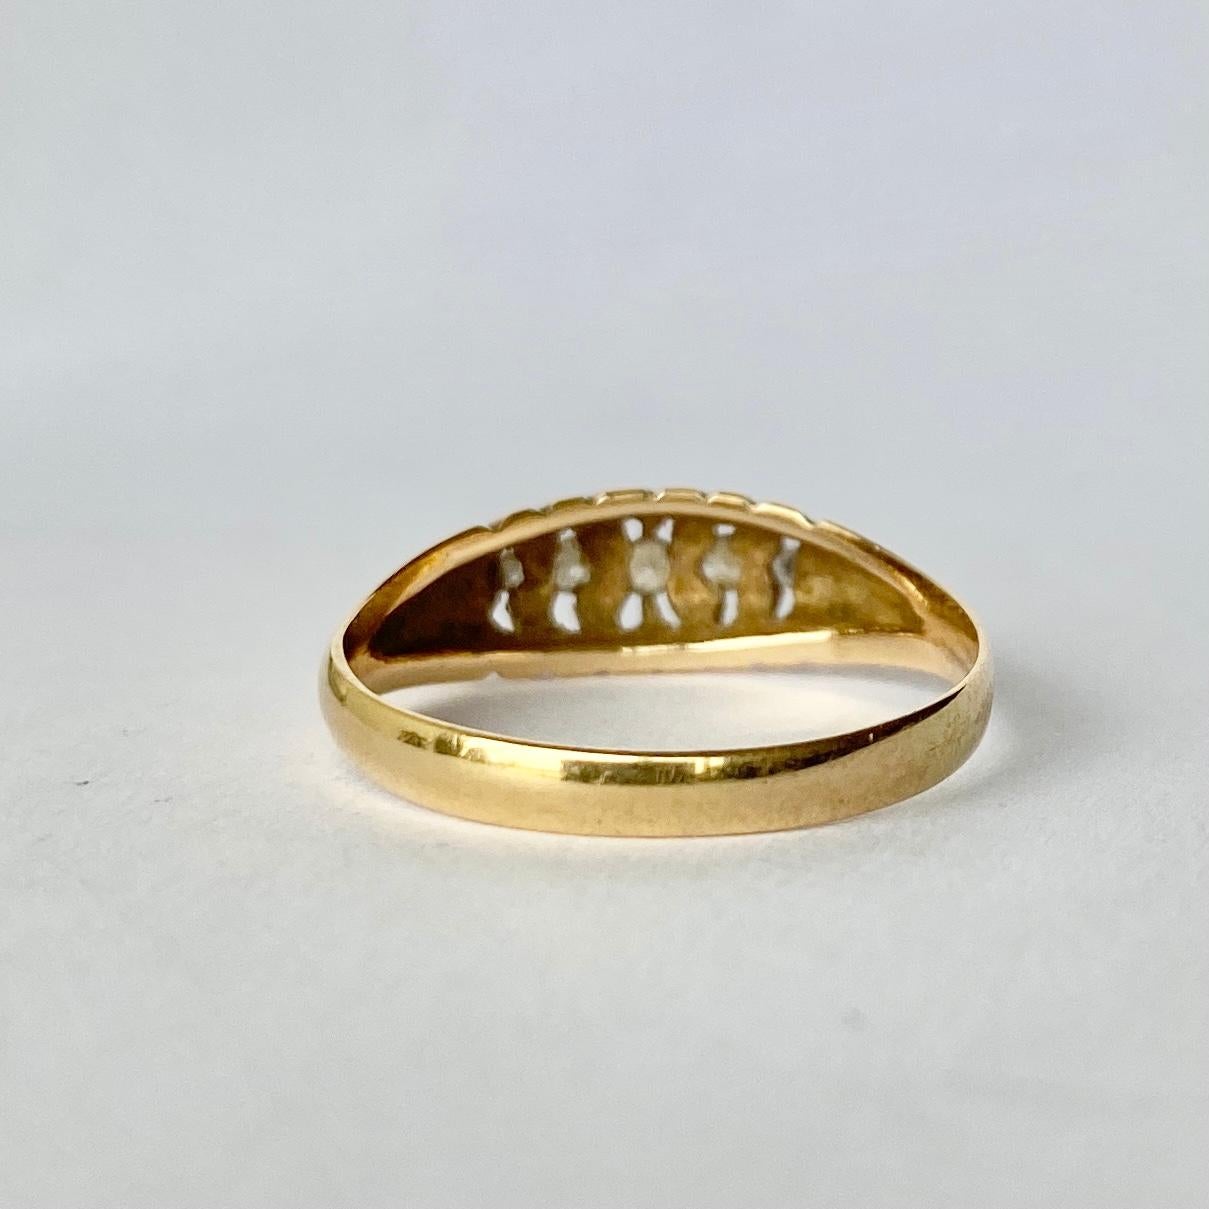 The boat shape setting in this ring holds a total of 5 diamonds totalling 20pts. The smooth band in which they sit is modelled in 18carat gold. Hallmarked Birmingham, 1971.

Ring Size: O 1/2 or 7 1/2
Band Width: 6mm

Weight: 2.38g